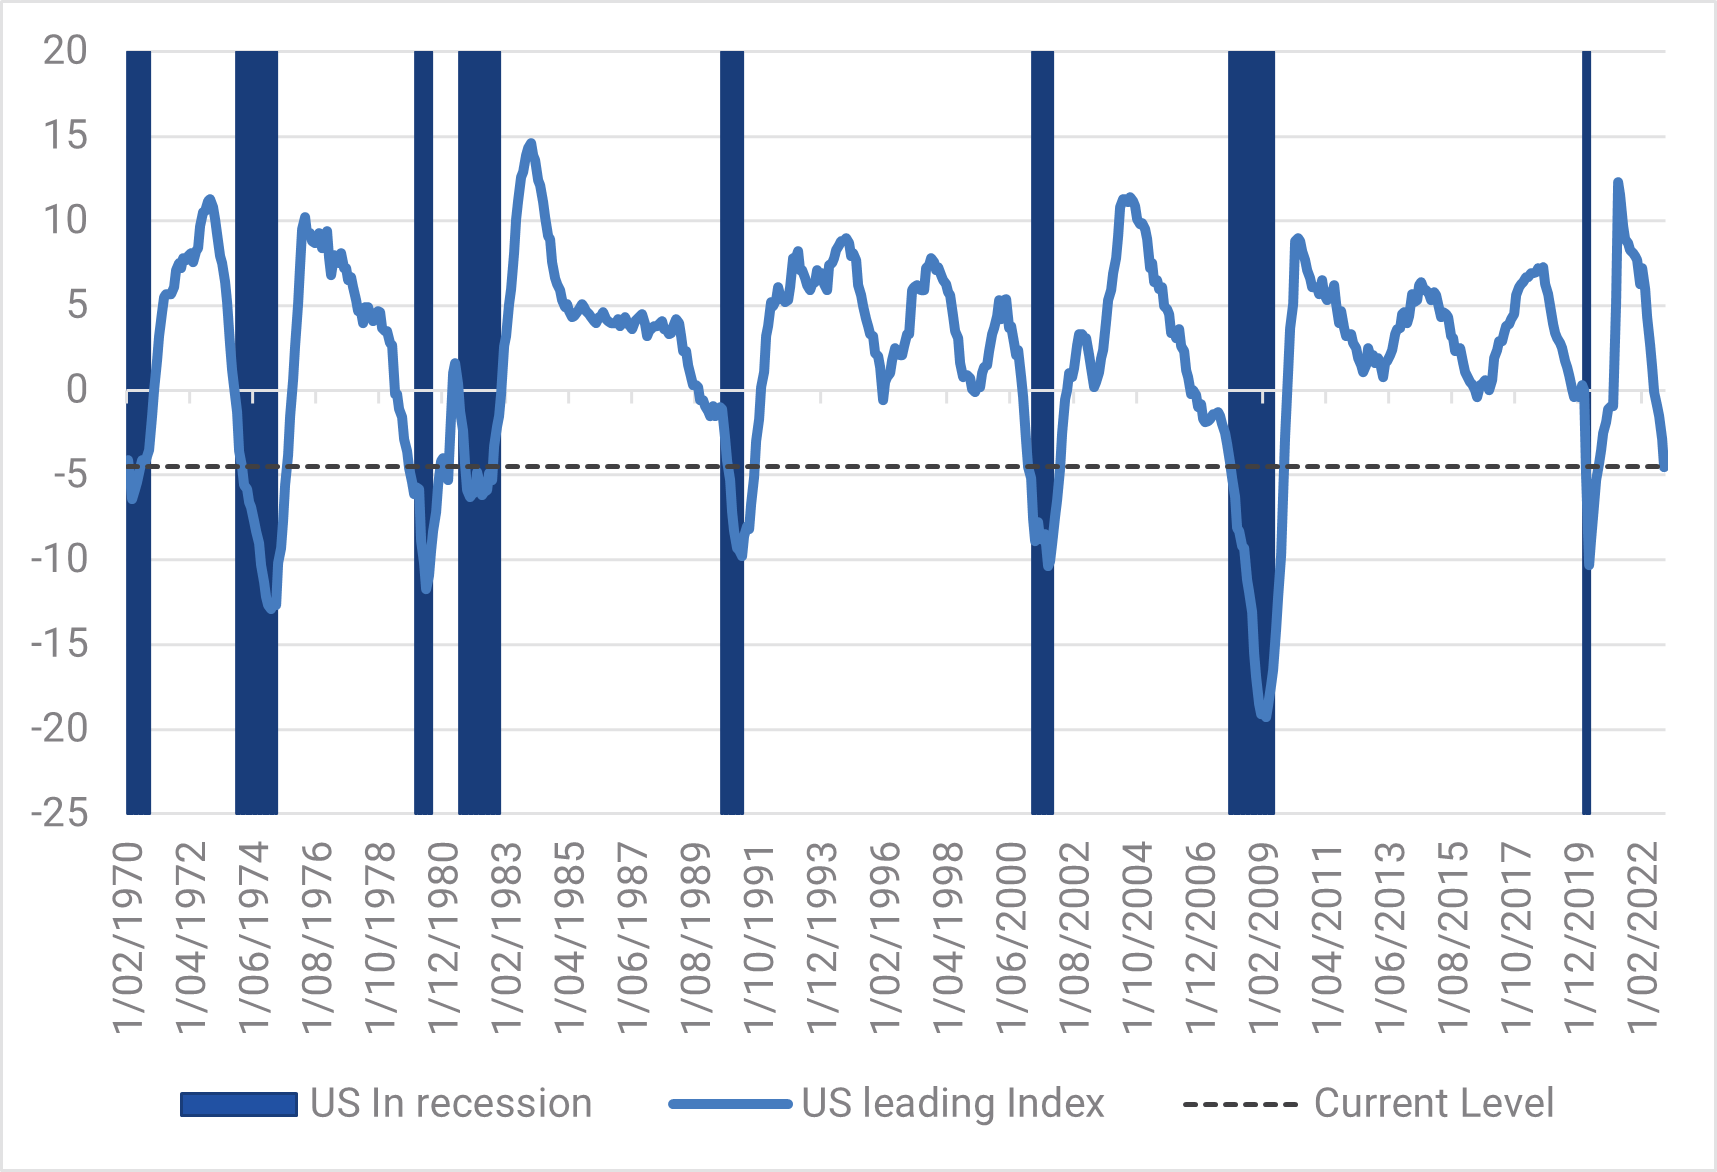 
Chart 7: US Recession and Leading Index

Source: YarraCM, Bloomberg